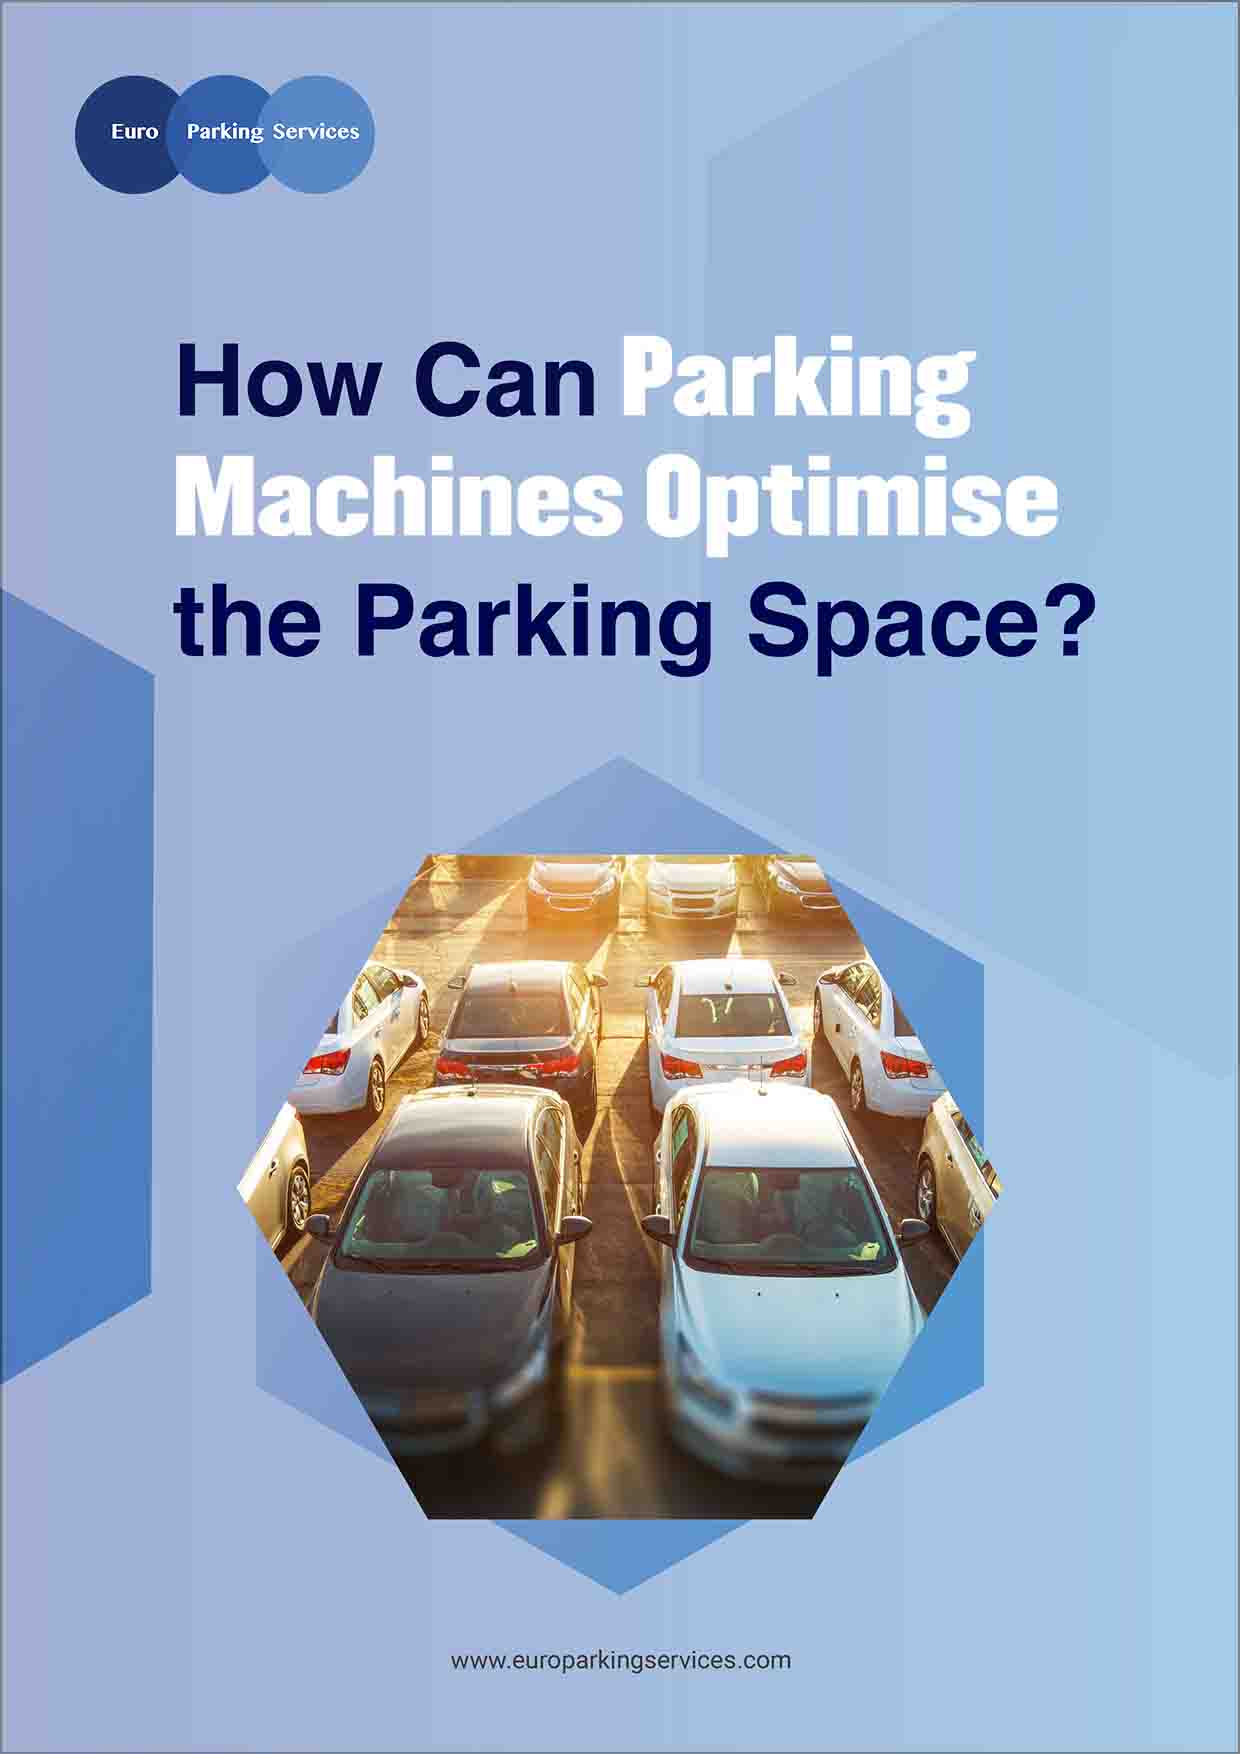 How Can Parking Machines Optimize the Parking Space